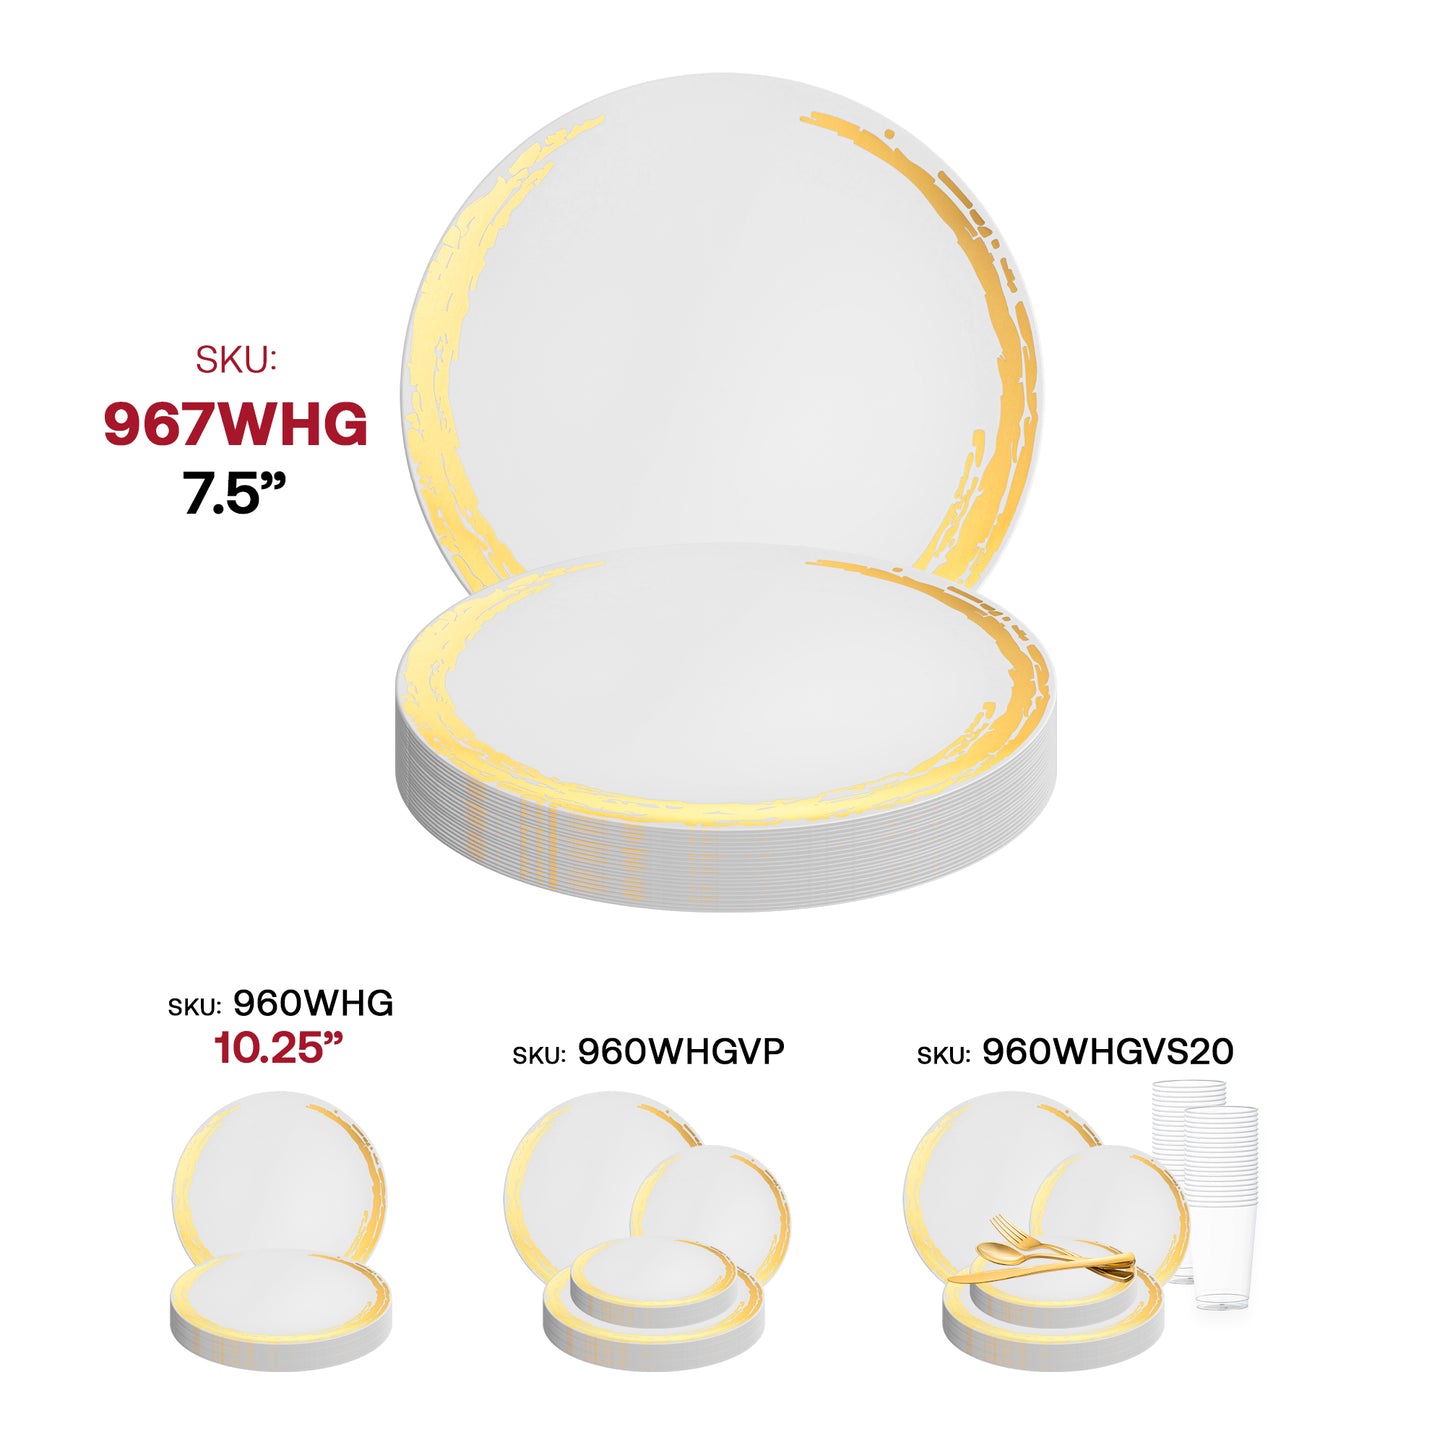 White with Gold Moonlight Round Disposable Plastic Appetizer/Salad Plates (7.5") SKU | The Kaya Collection